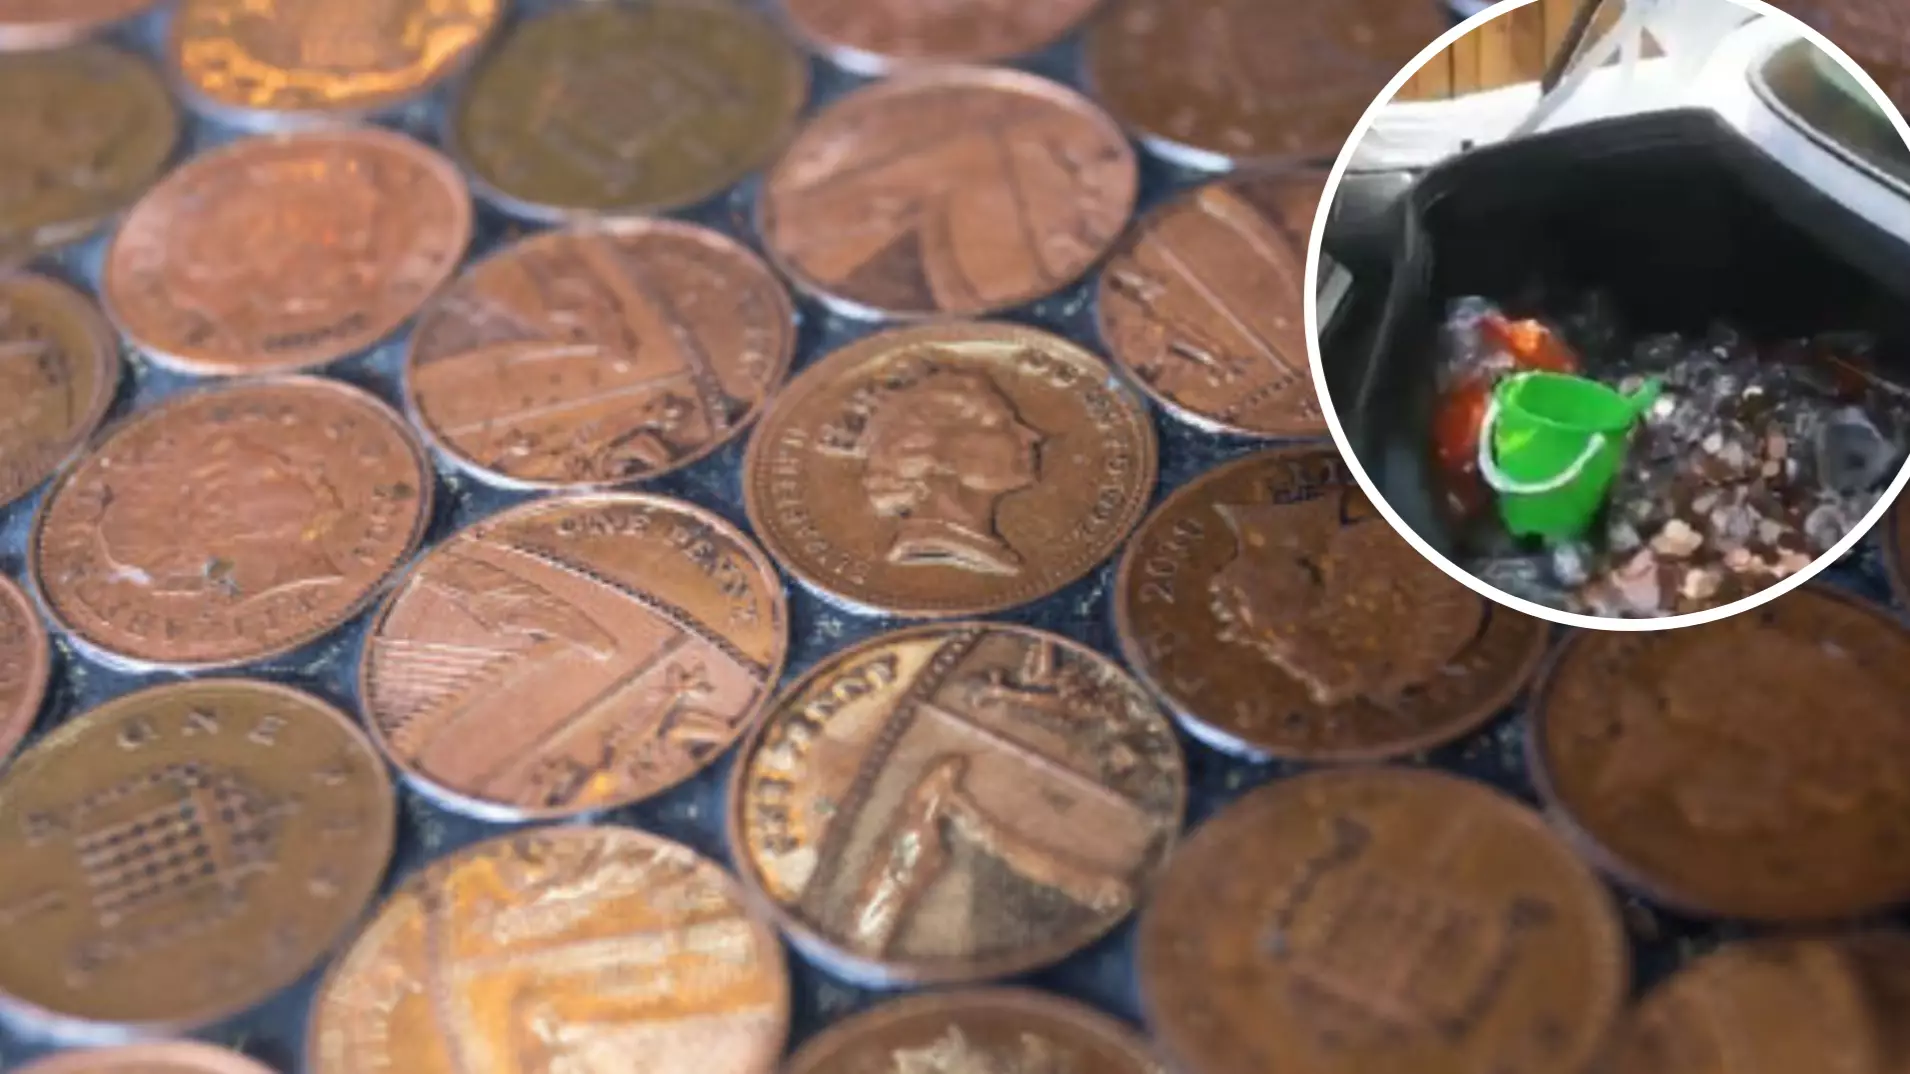 Guy Pays £1,200 To Bailiff In Pennies